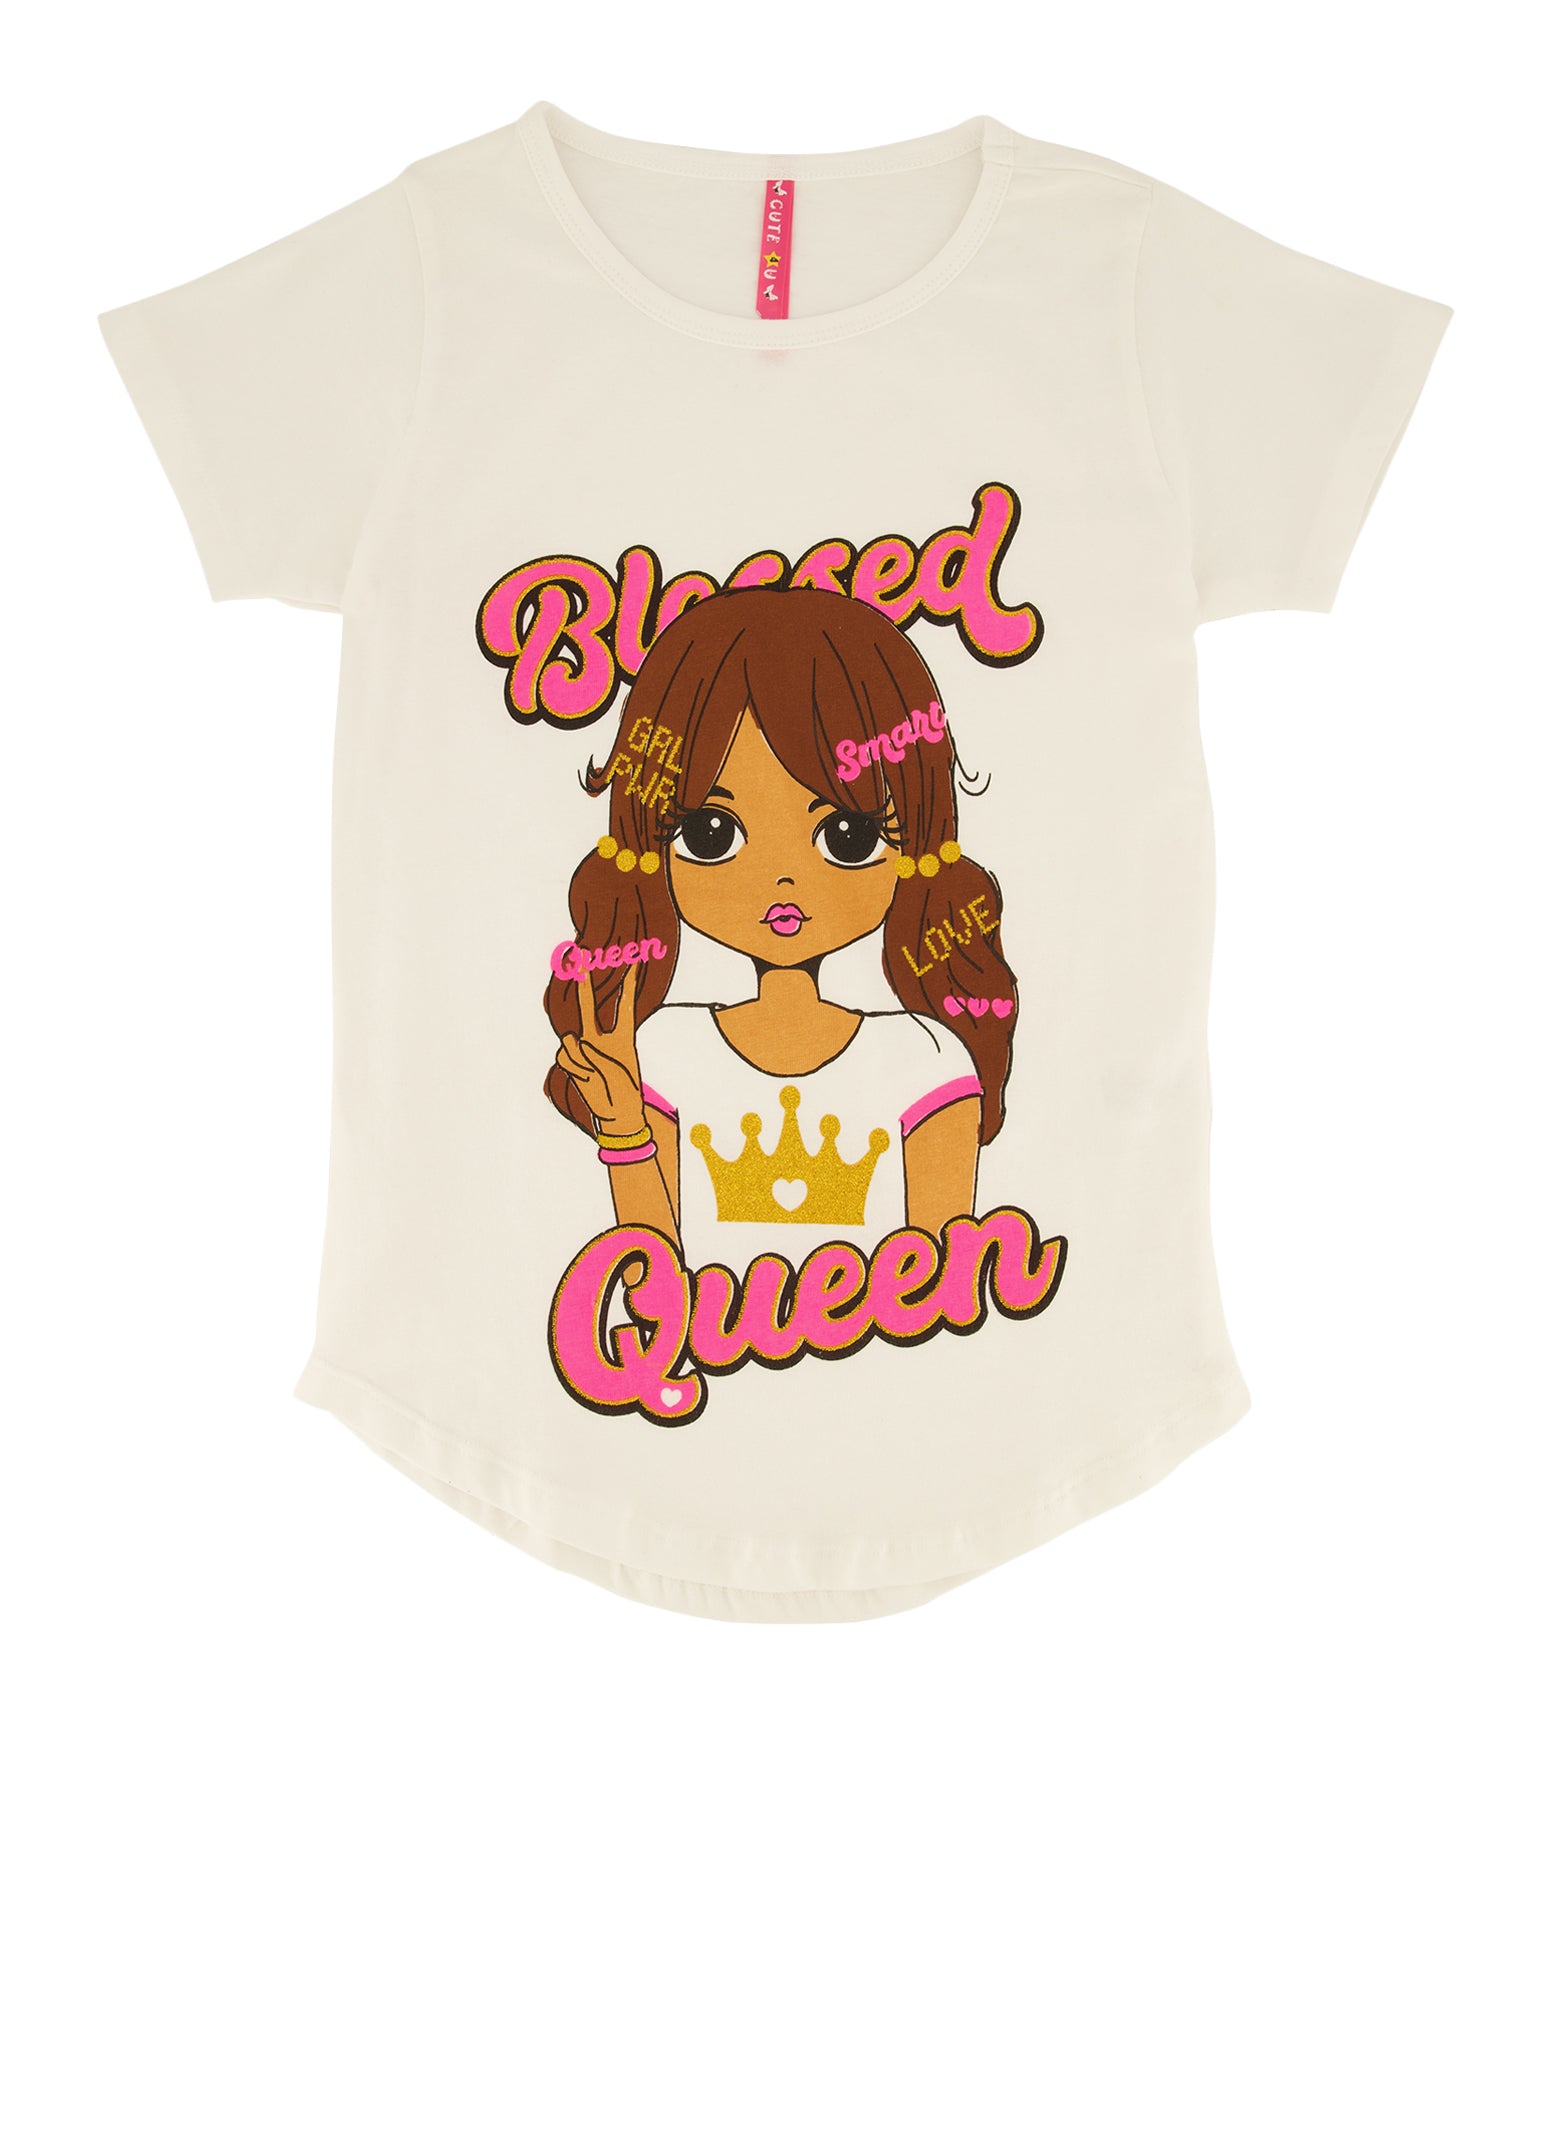 Girls Blessed Queen Glitter Graphic Tee, White, Size 7-8